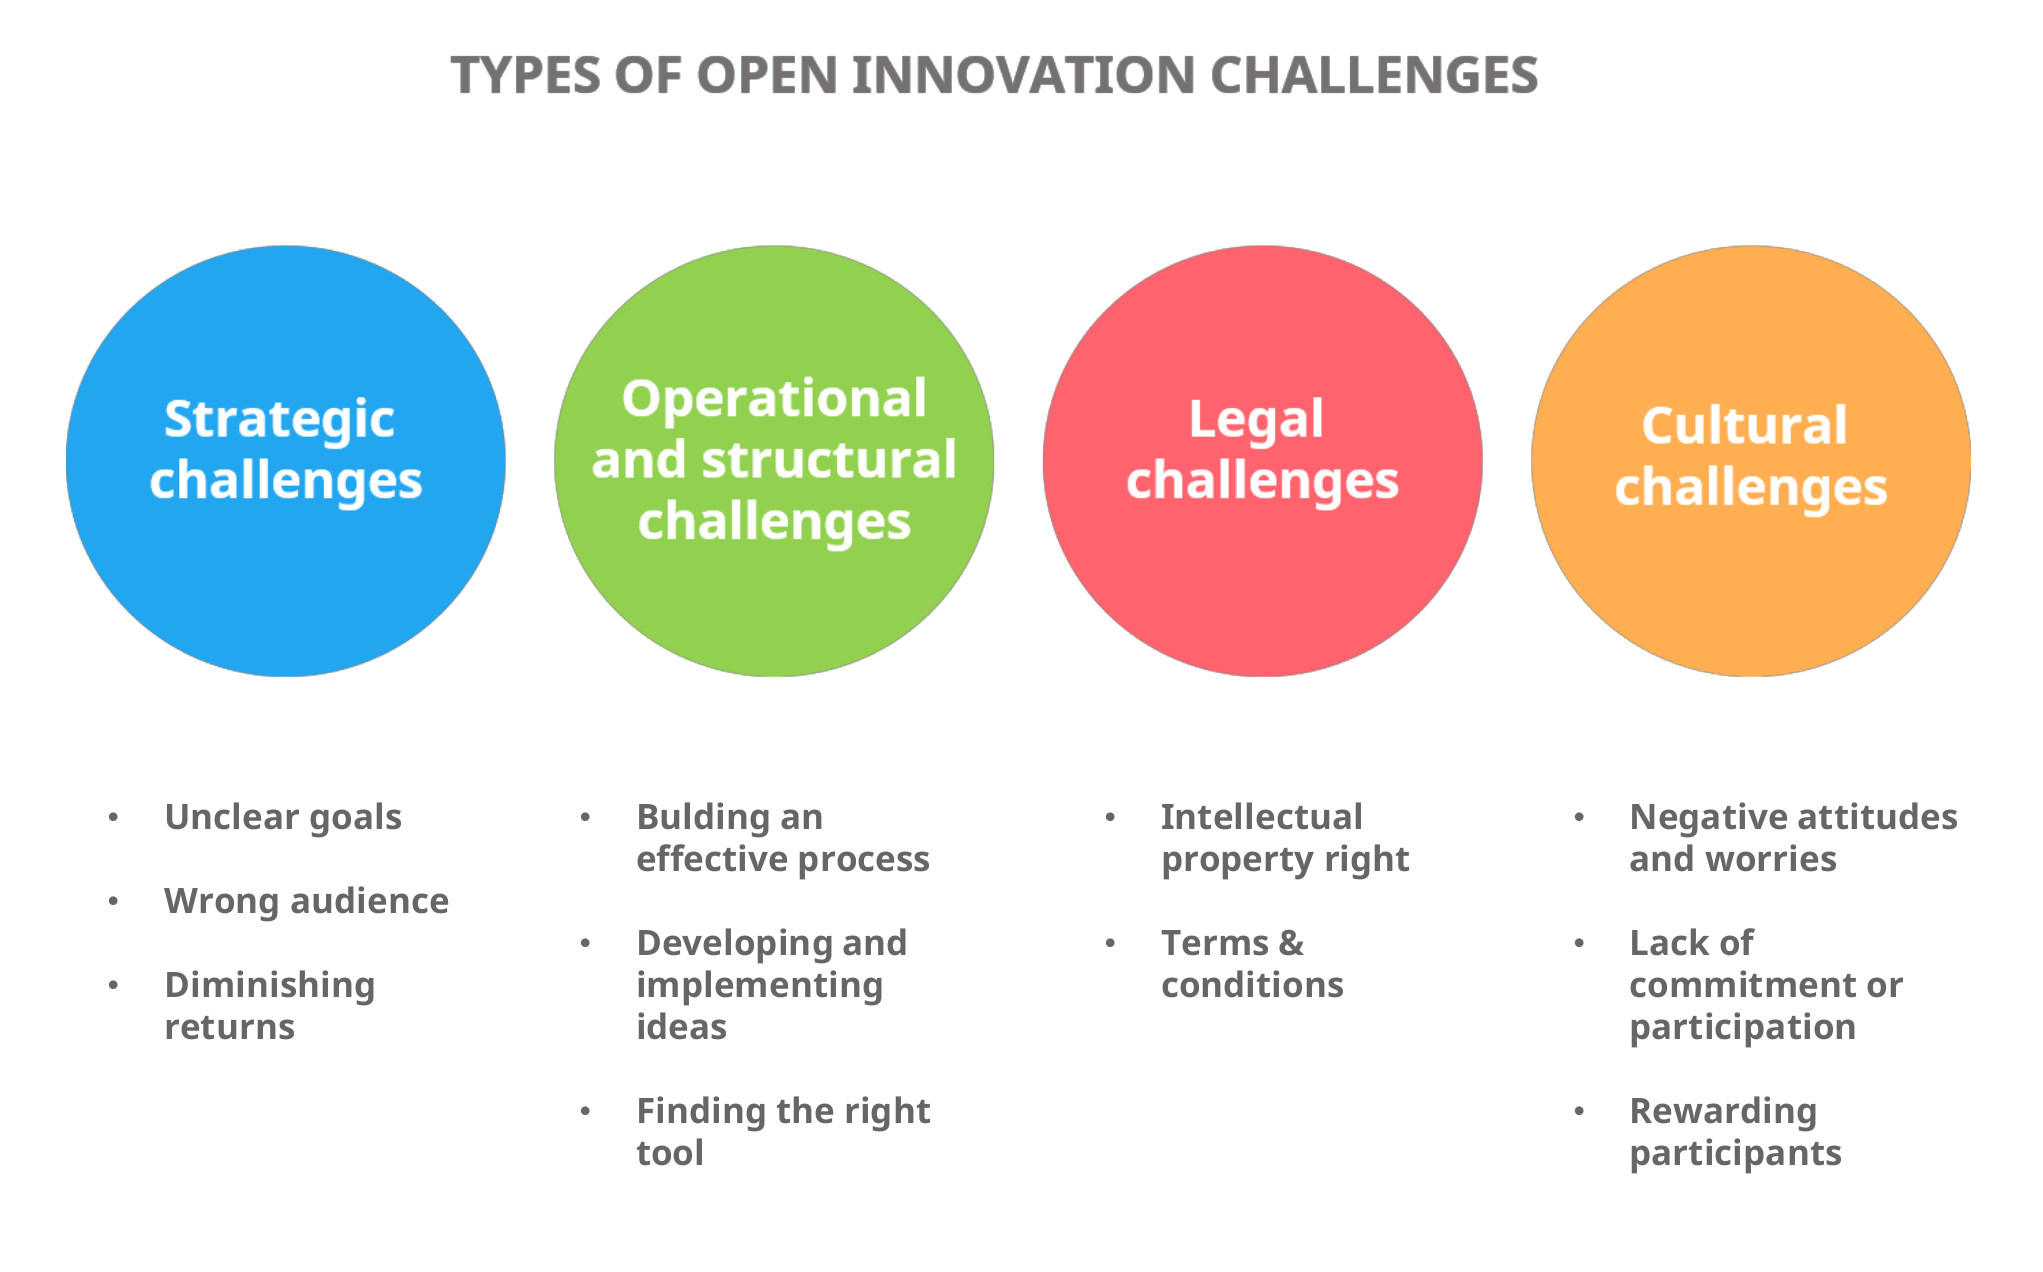 Open innovation challenges